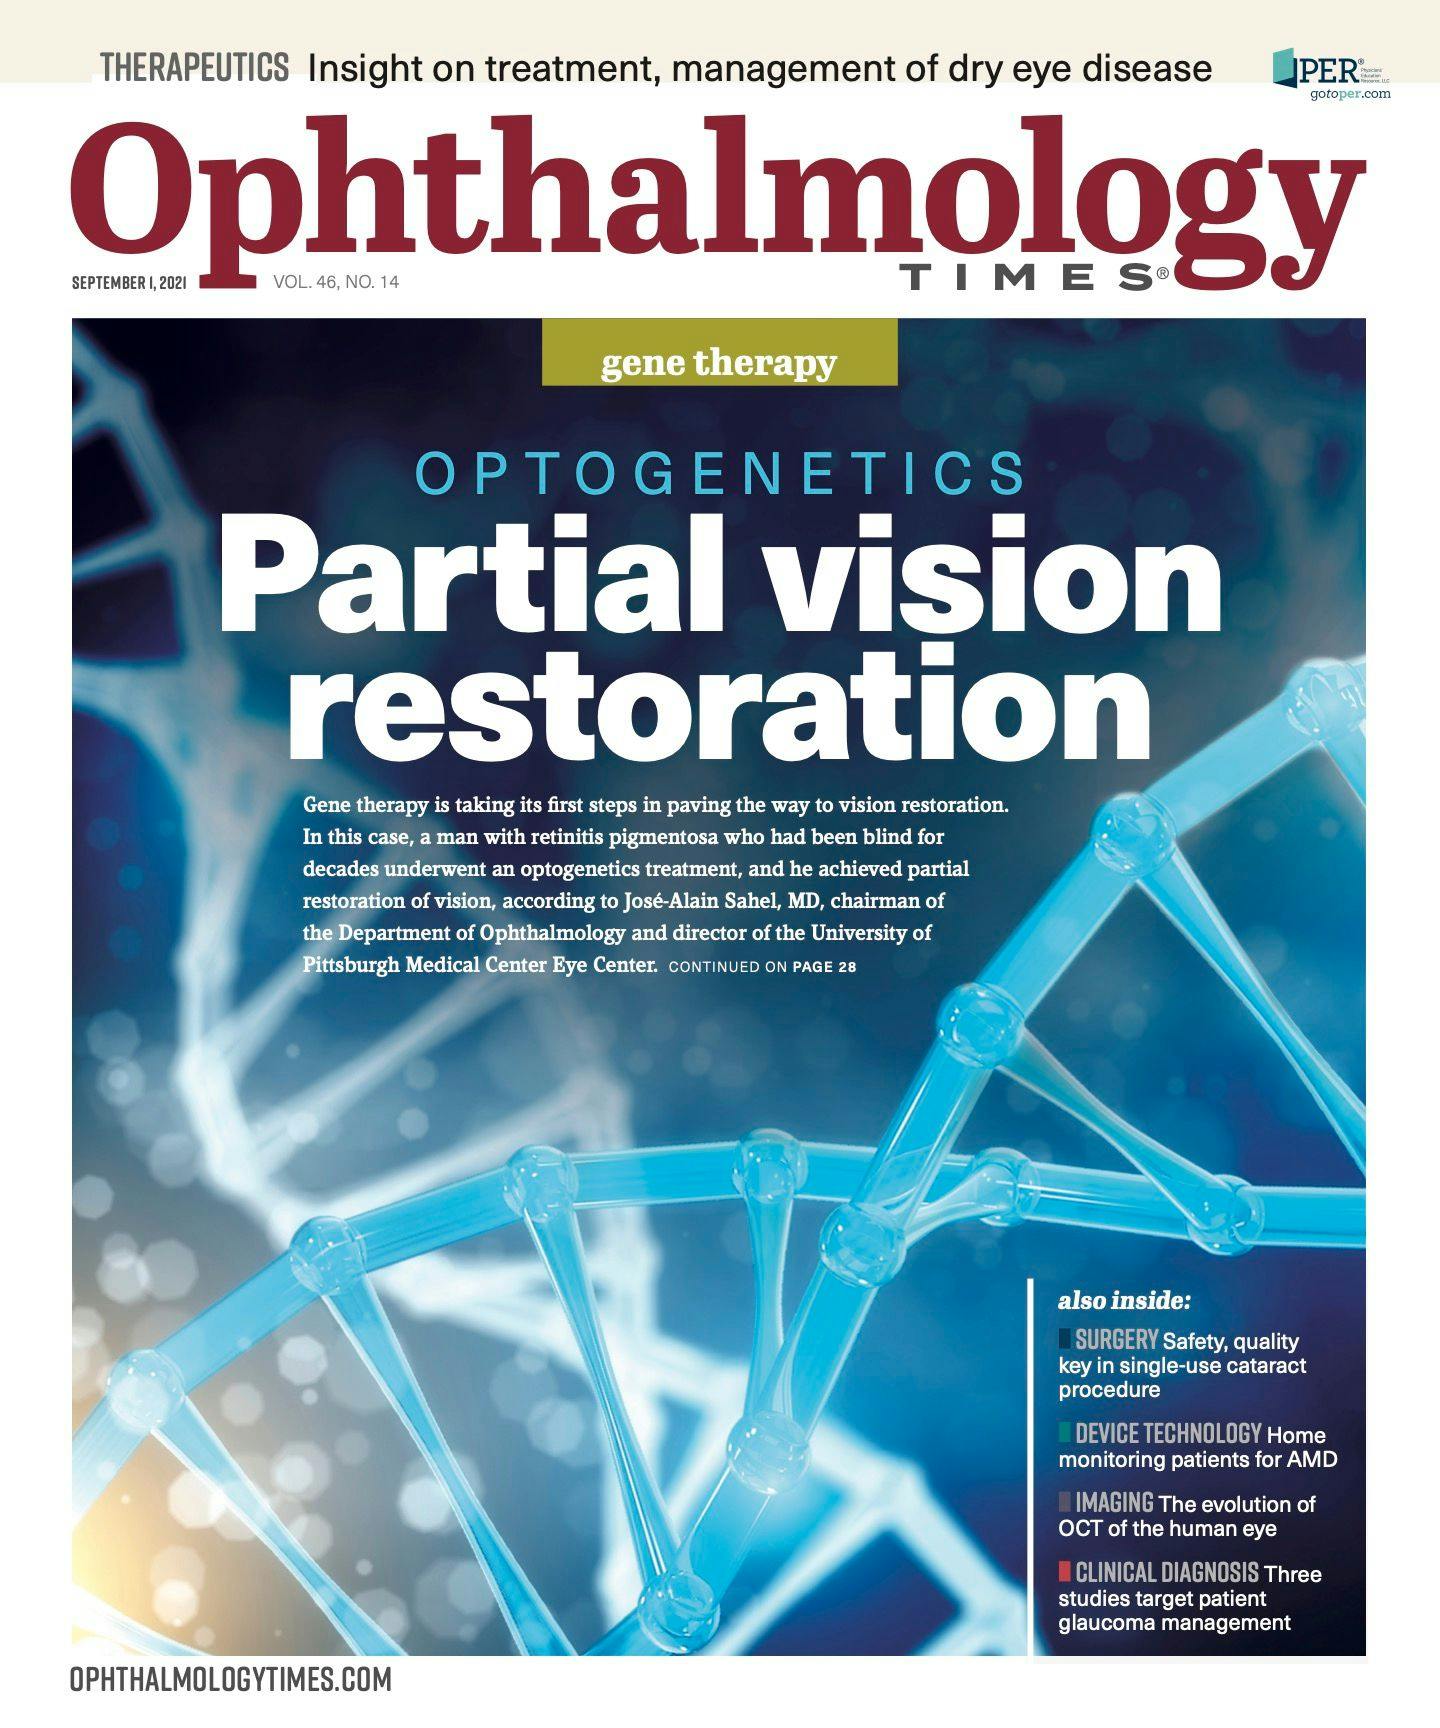 Ophthalmology Times: September 1, 2021